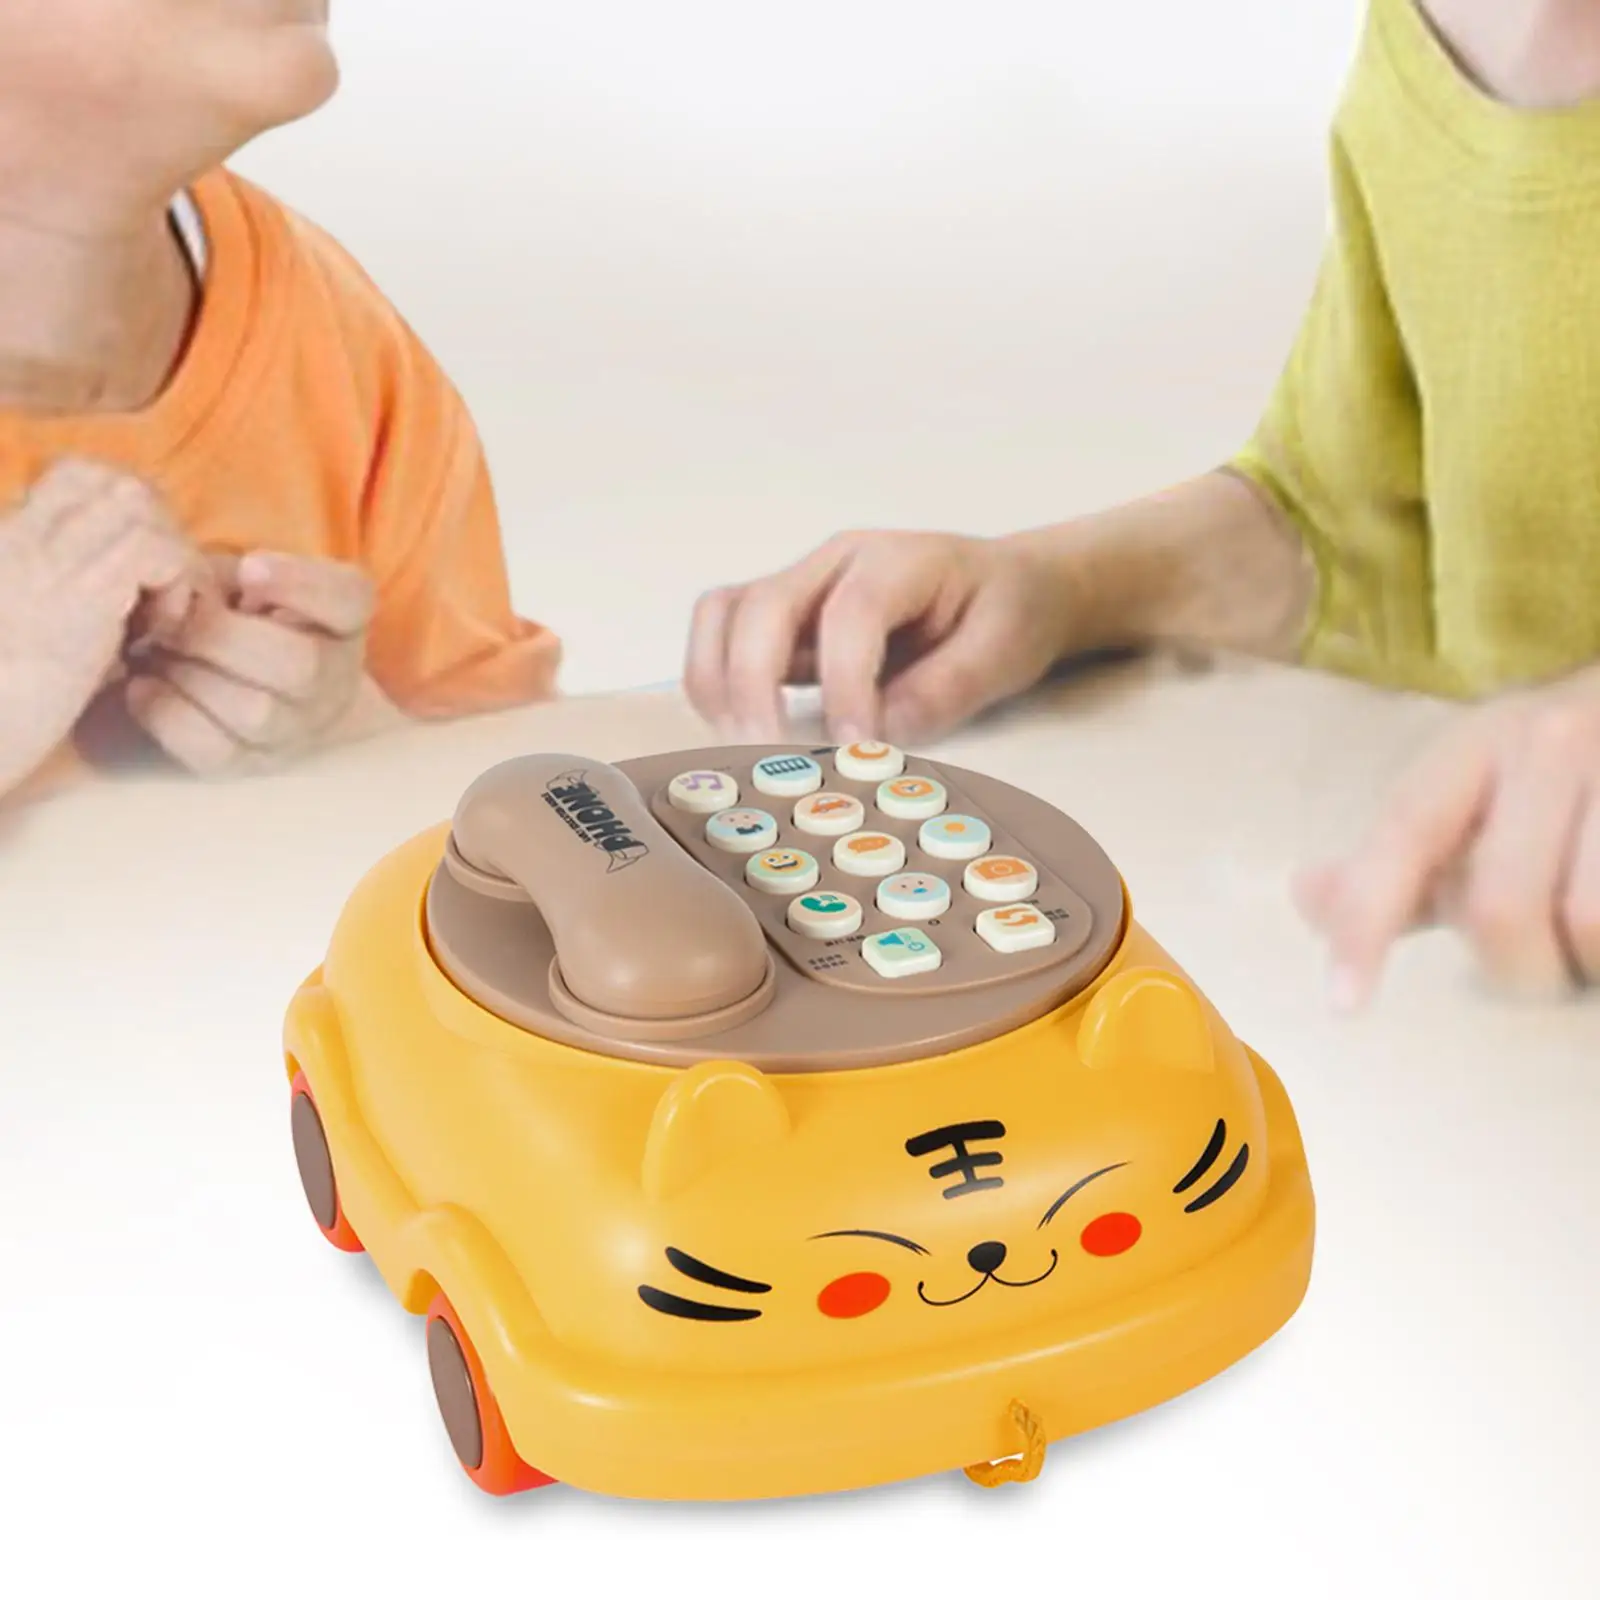 Telefone Cognitive Development Toy for Kids, Luzes, Piano, Early Learning Phones, Preschool Educational Learning, Girl